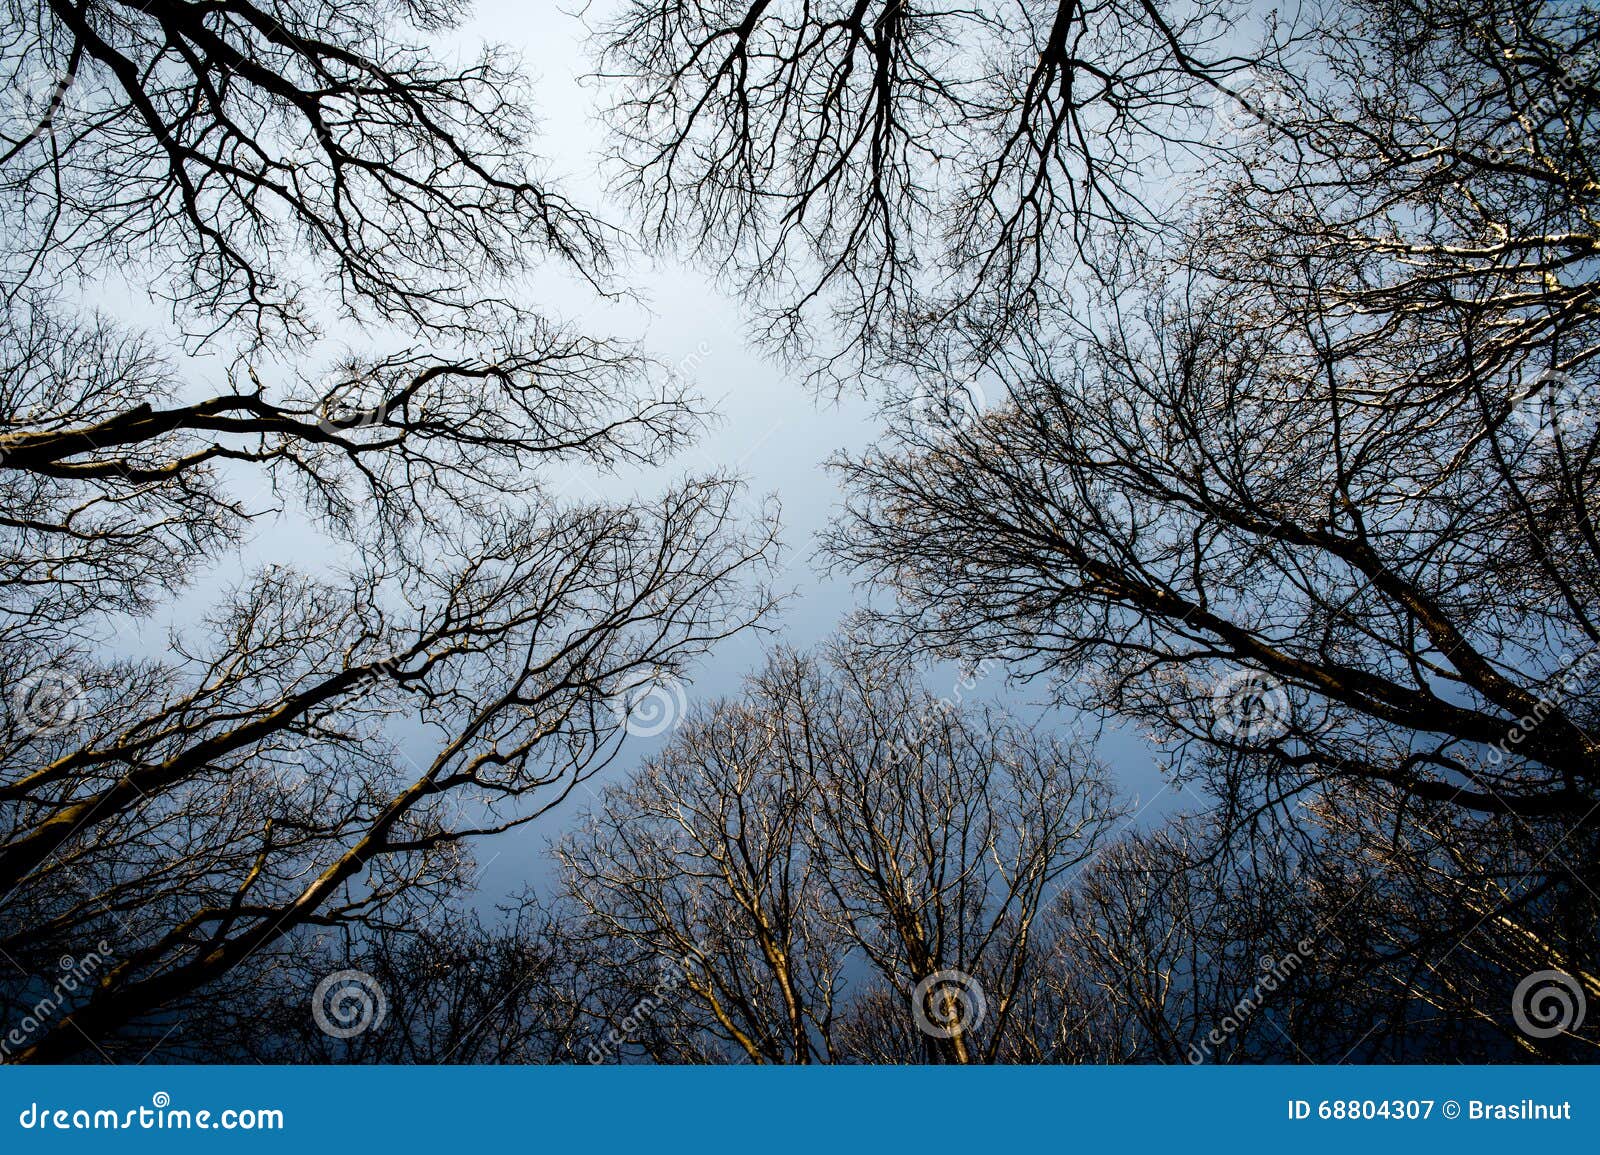 Looking Up Perspective of Winter Trees Stock Image - Image of tree ...